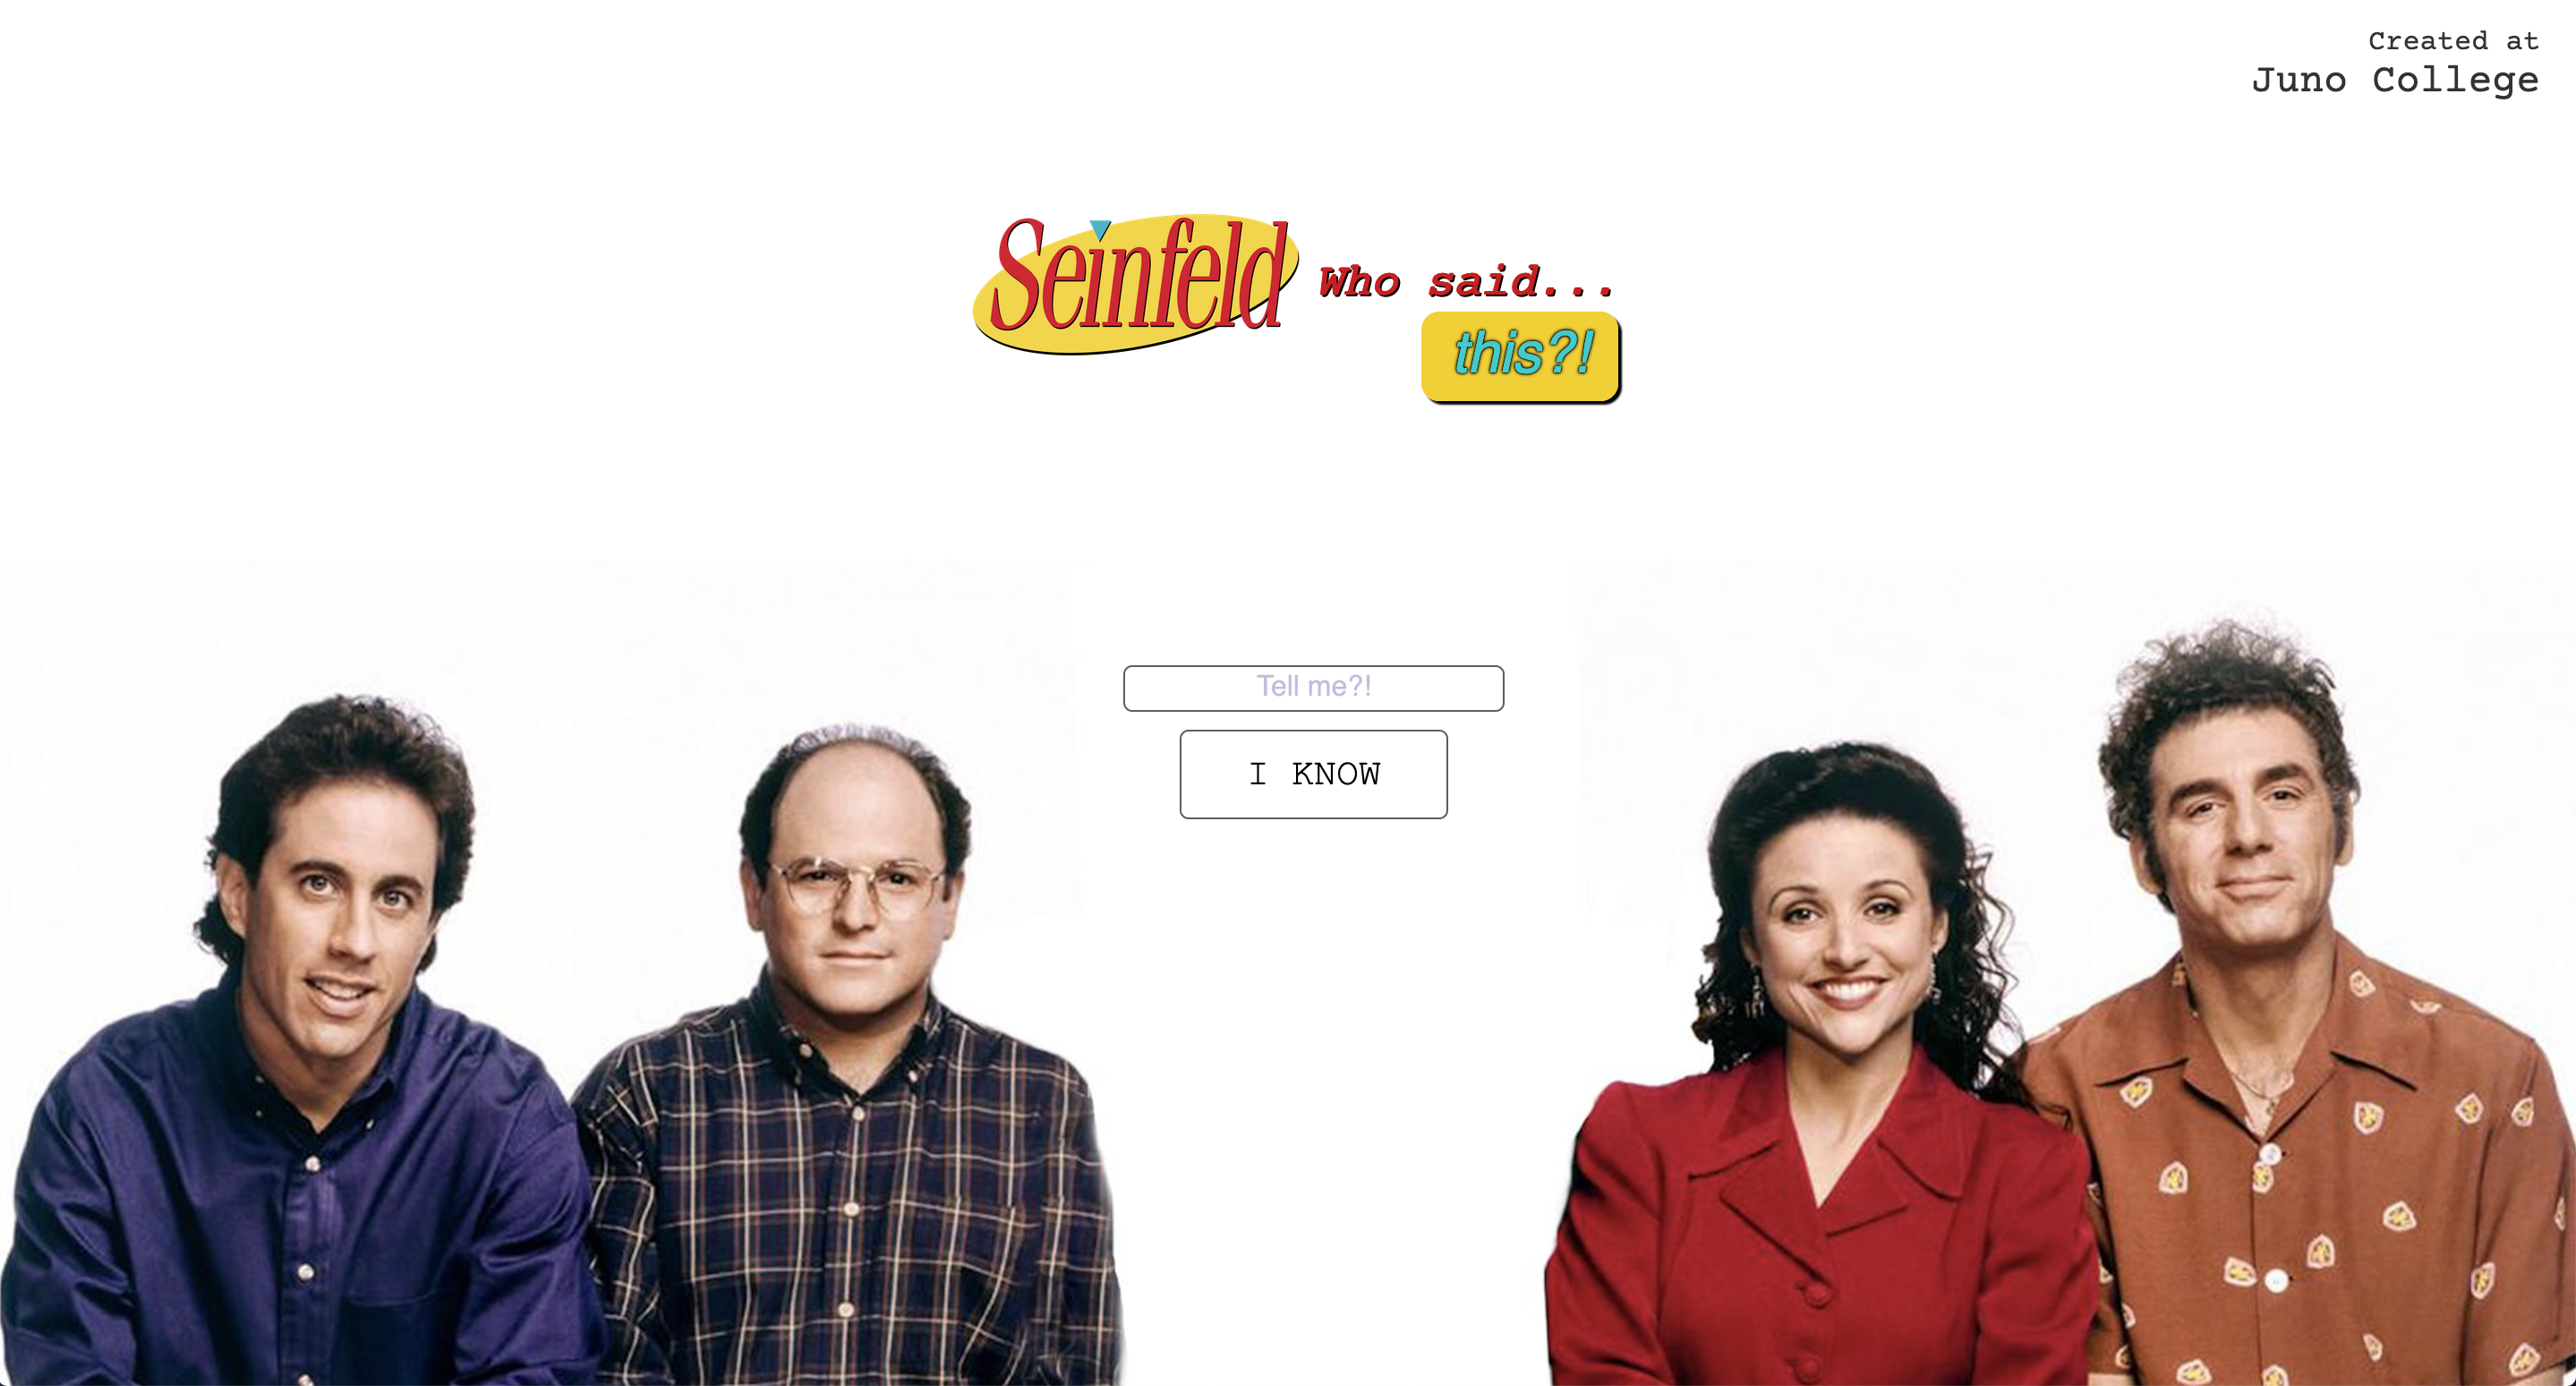 the homepage for a seinfeld quote guessing game